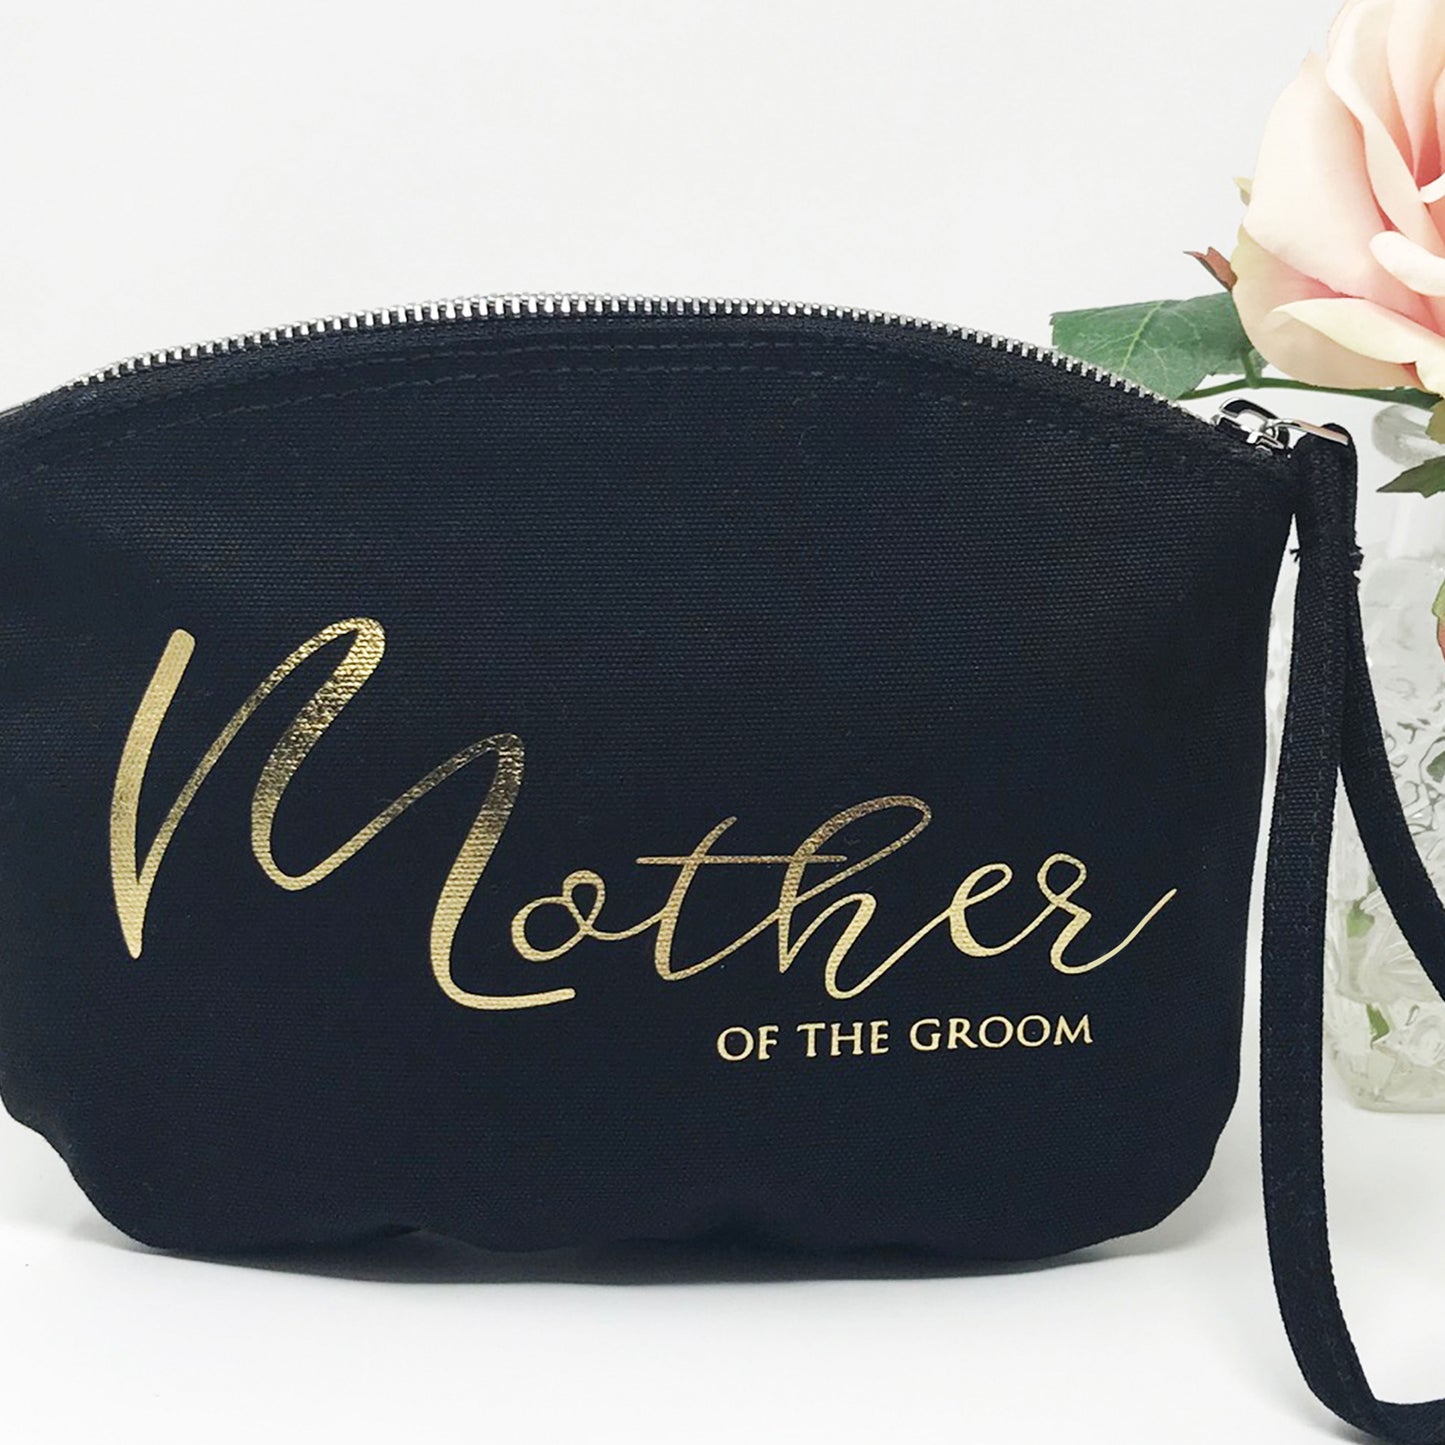 Mother of the Groom Personalised Cosmetic Bag - FREE UK SHIPPING